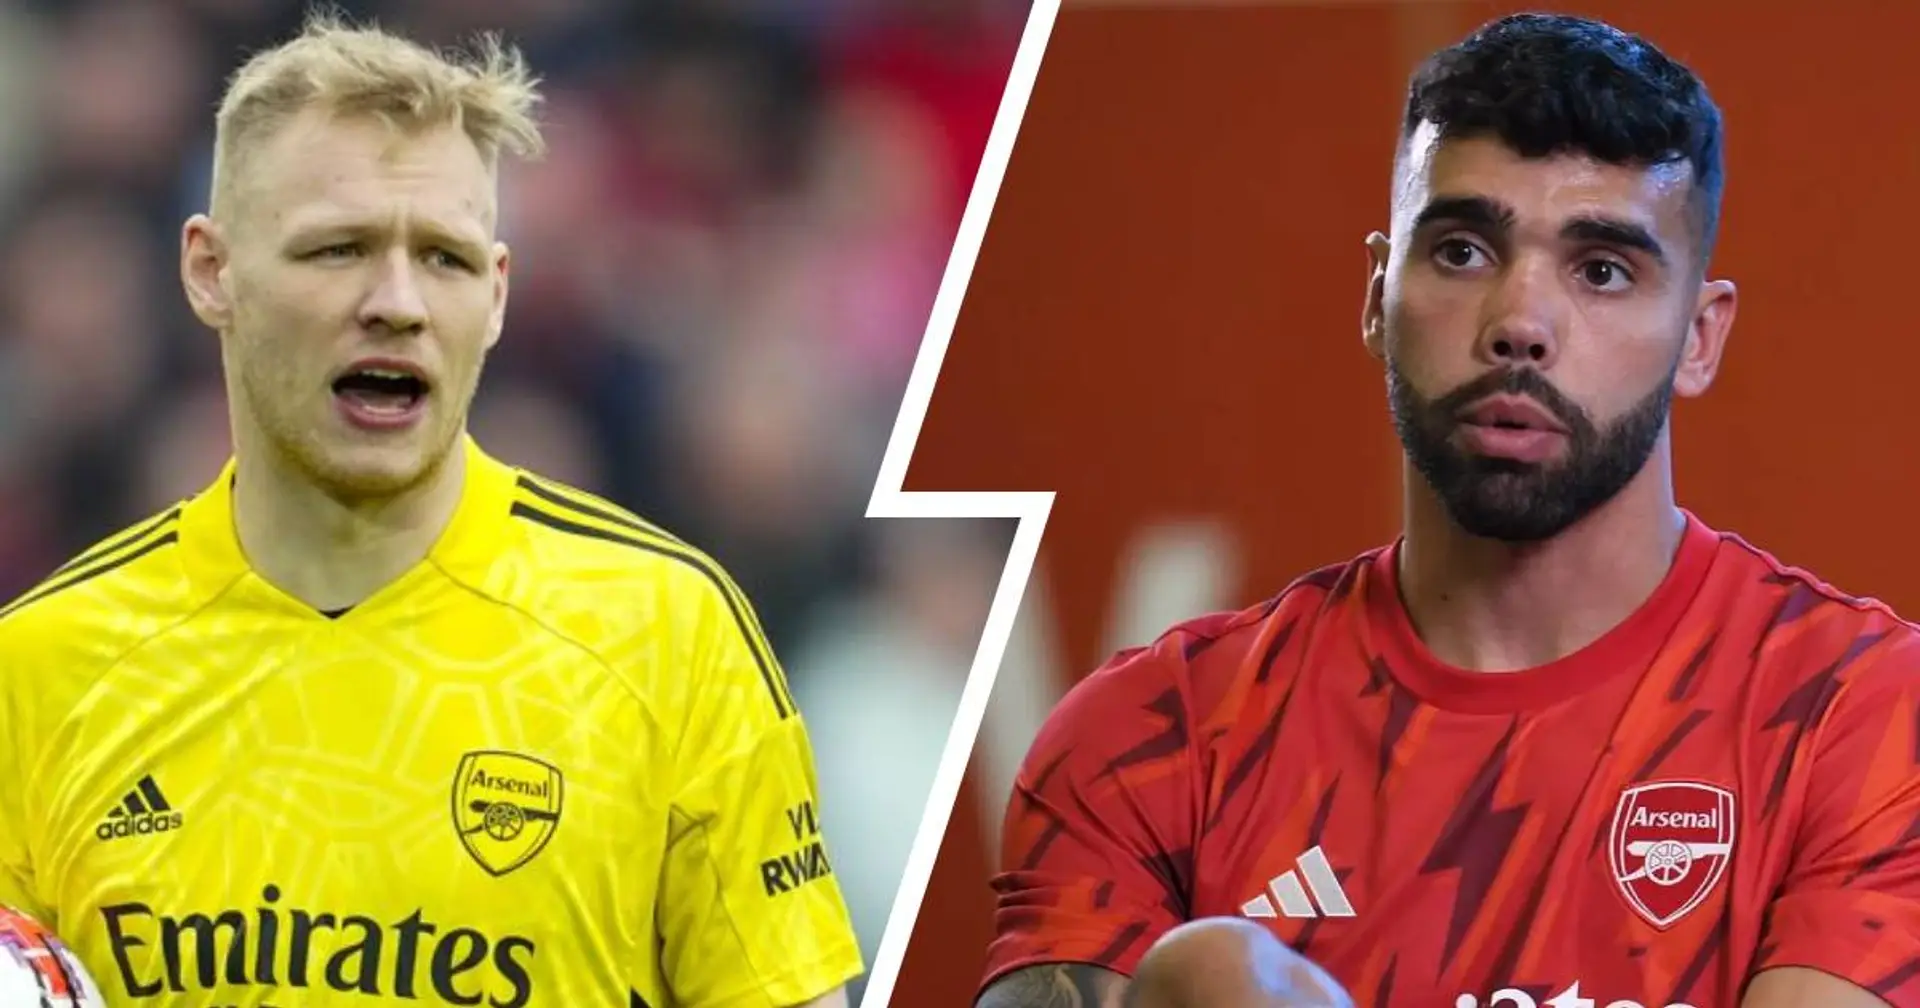 'Ramsdale was easier': David Raya's agent claims Arsenal wanted to sign his client first